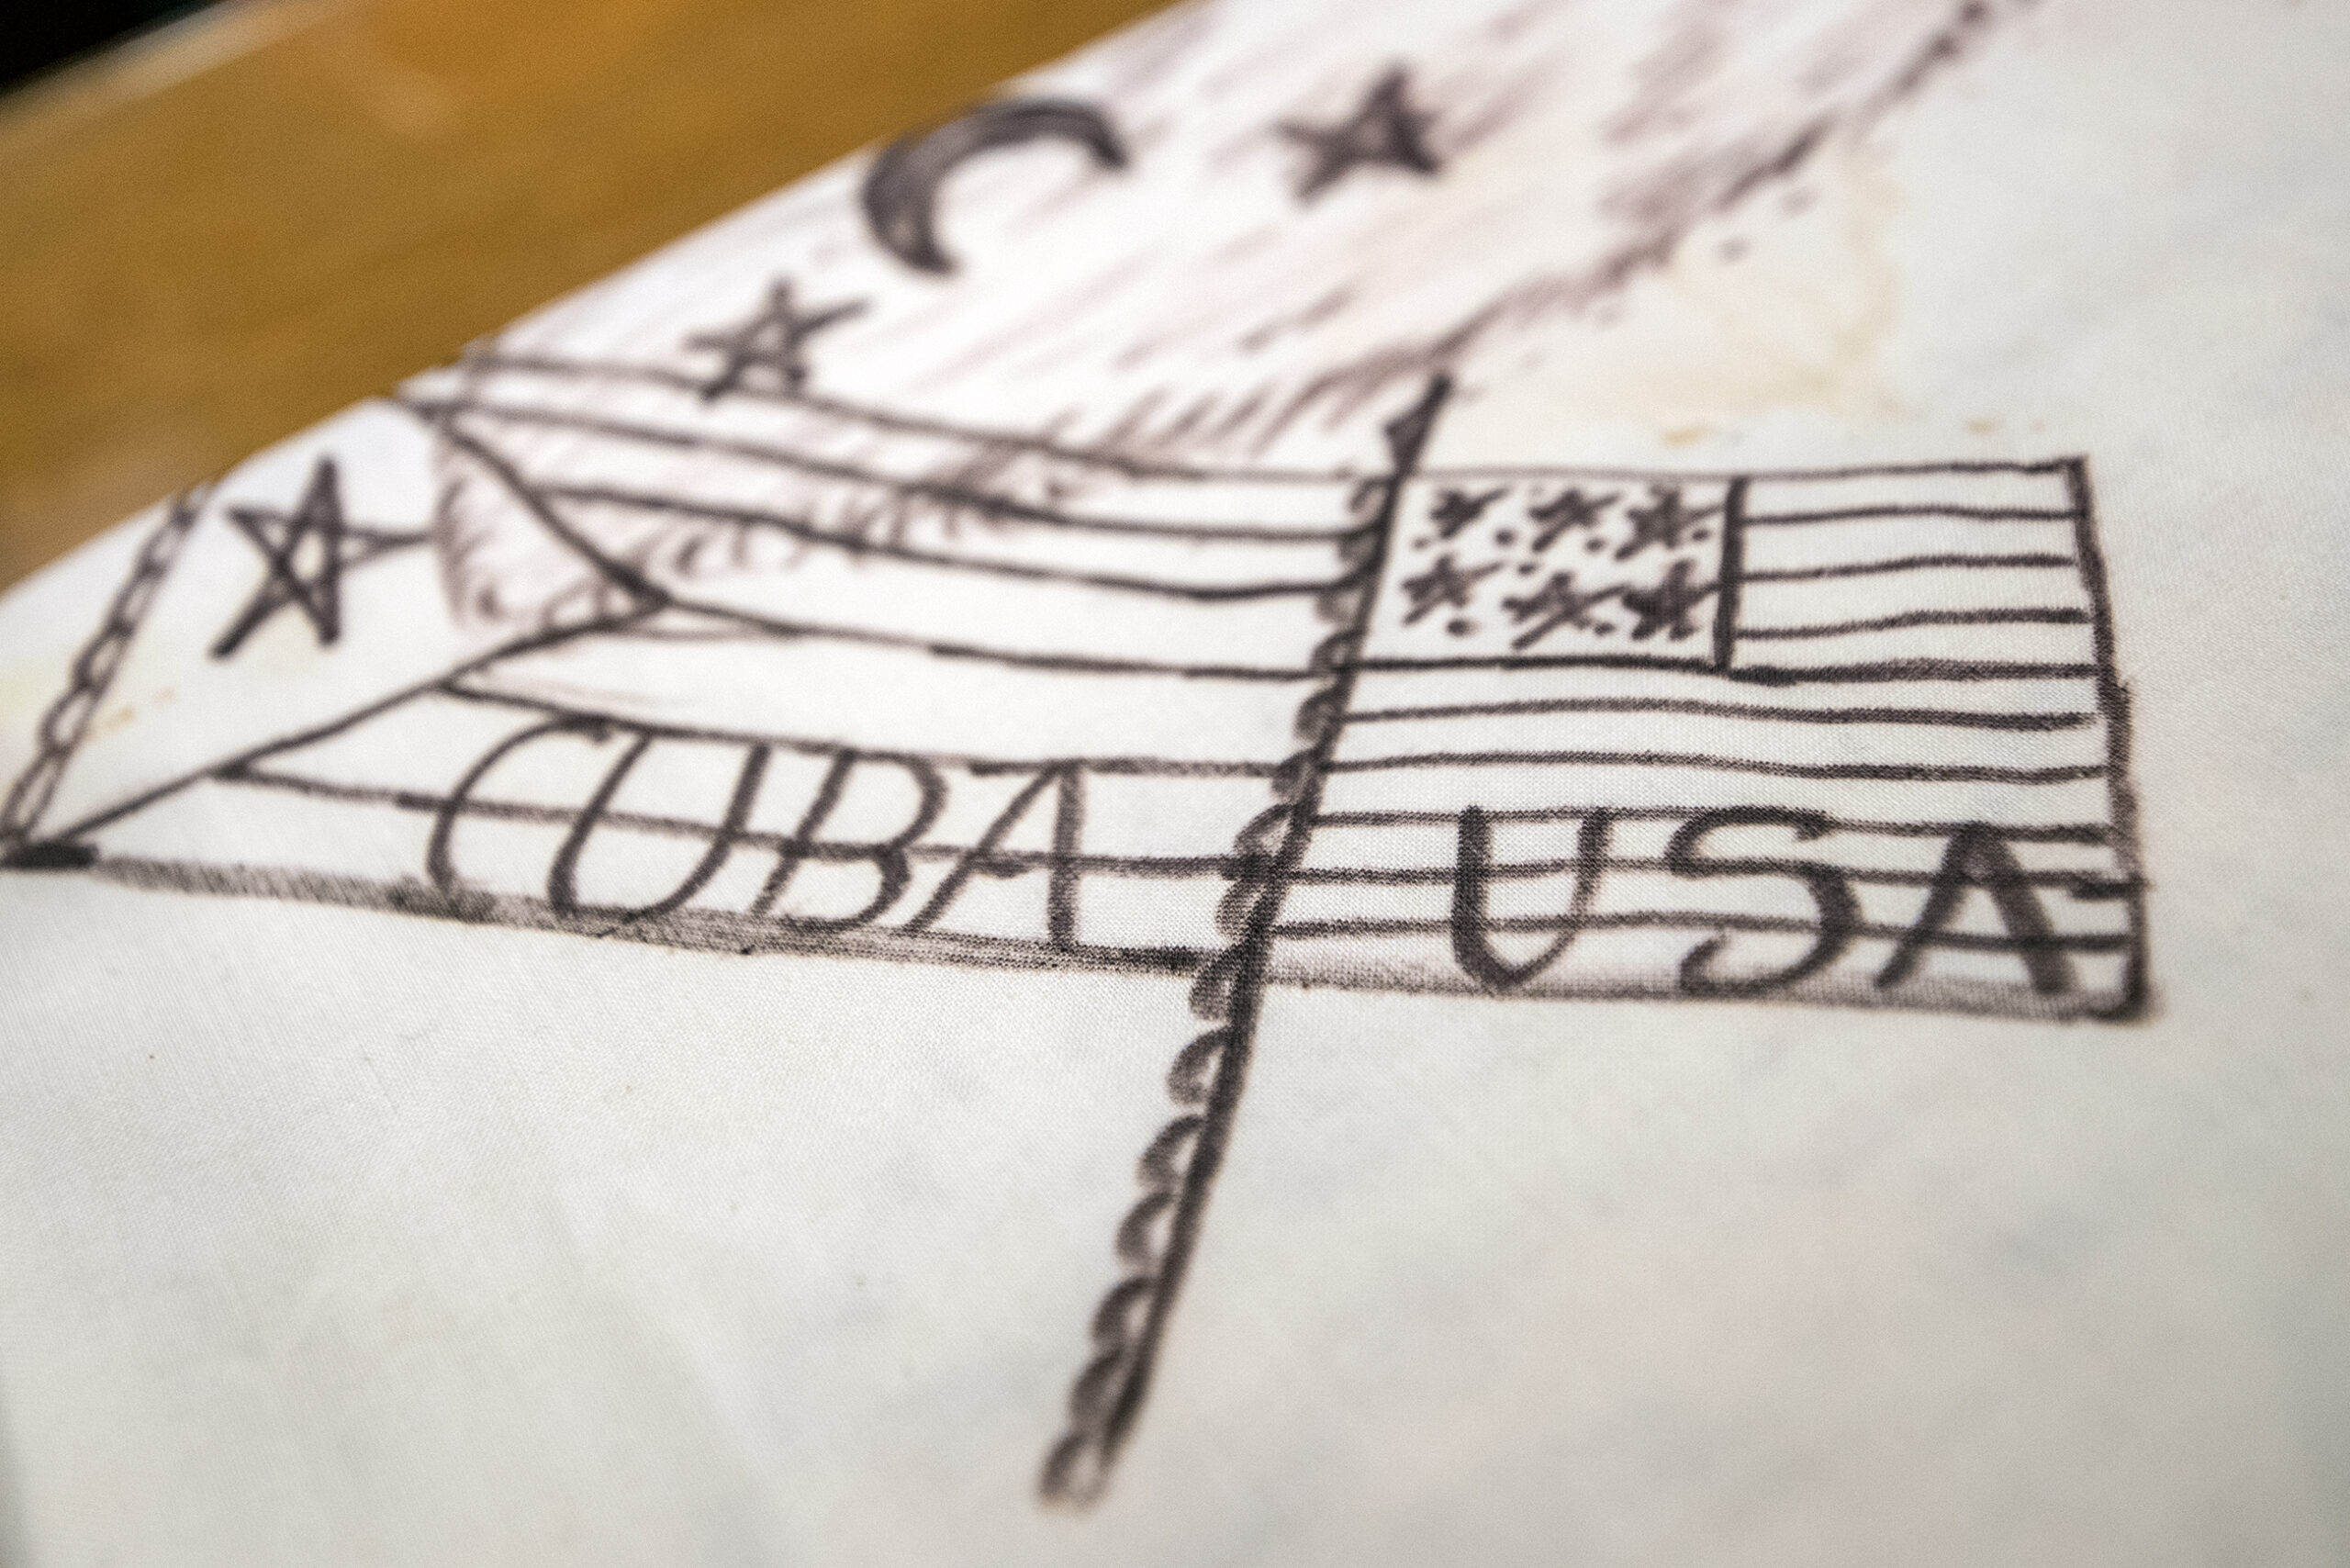 A cloth drawing of the U.S. and Cuba flags